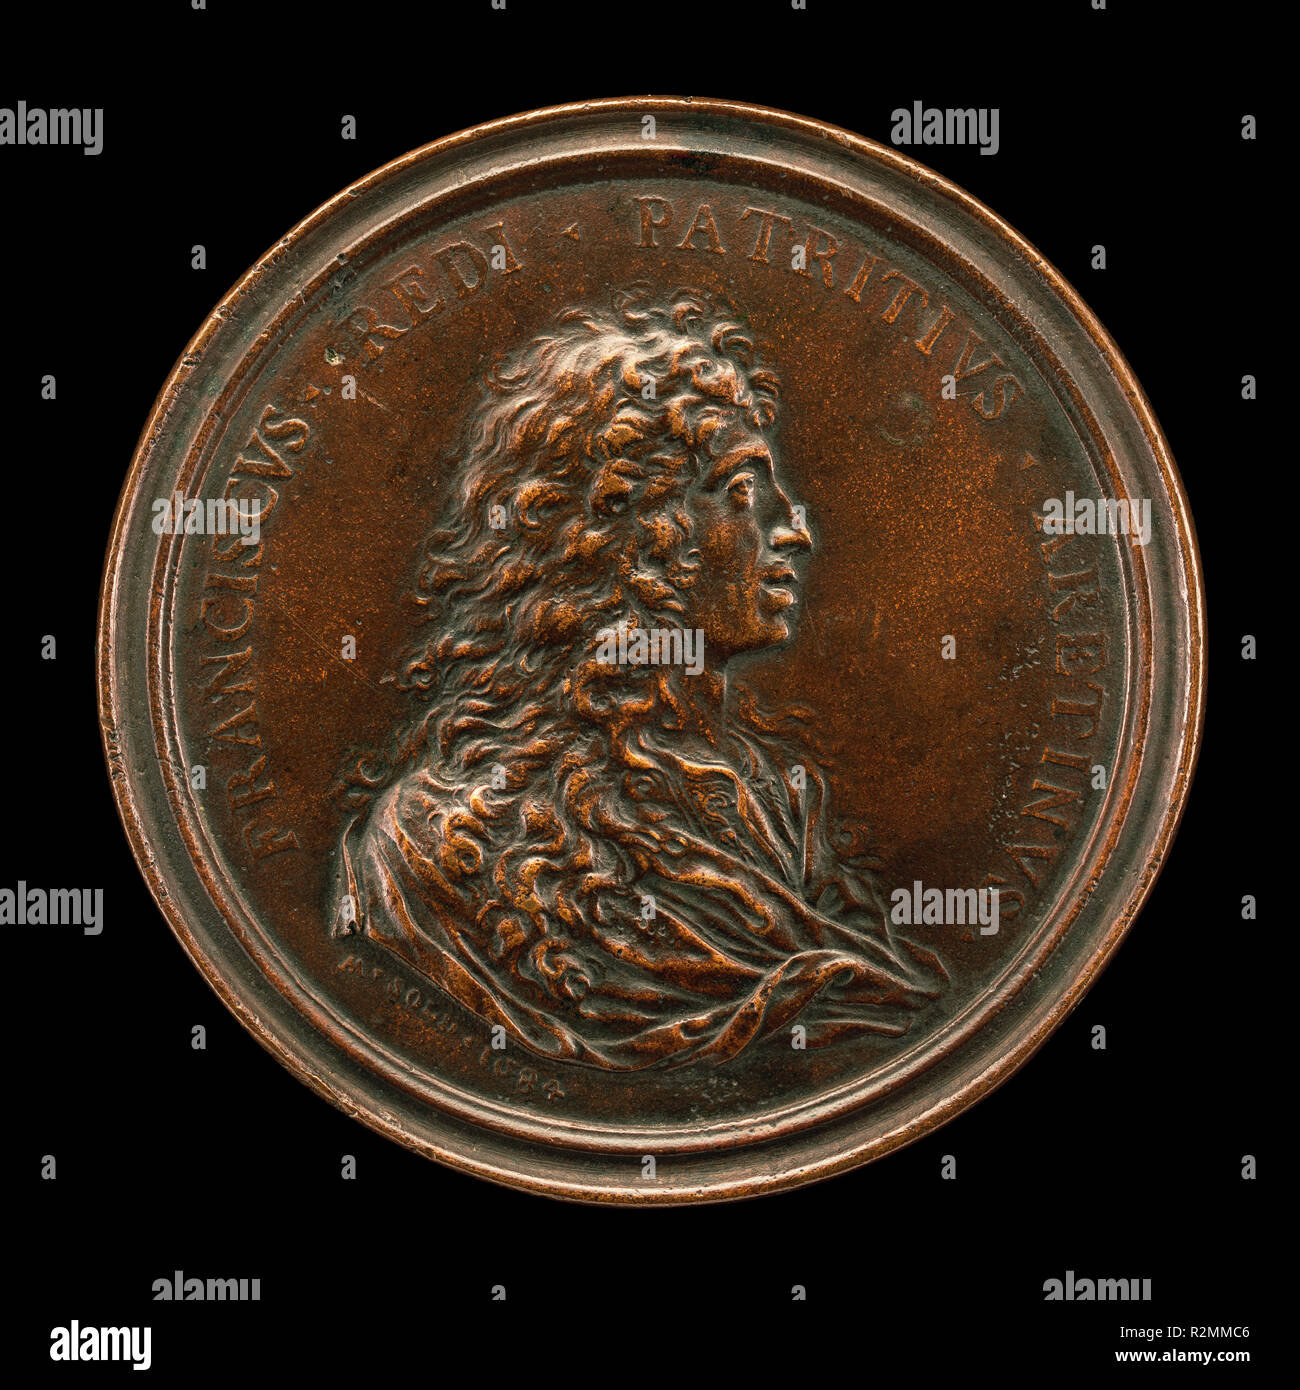 Francesco Redi, 1626-1697, Physician and Scientist [obverse]. Dated: 1684. Dimensions: overall (diameter): 8.76 cm (3 7/16 in.)  gross weight: 183.37 gr (0.404 lb.)  axis: 12:00. Medium: bronze. Museum: National Gallery of Art, Washington DC. Author: Massimiliano Soldani Benzi. Stock Photo